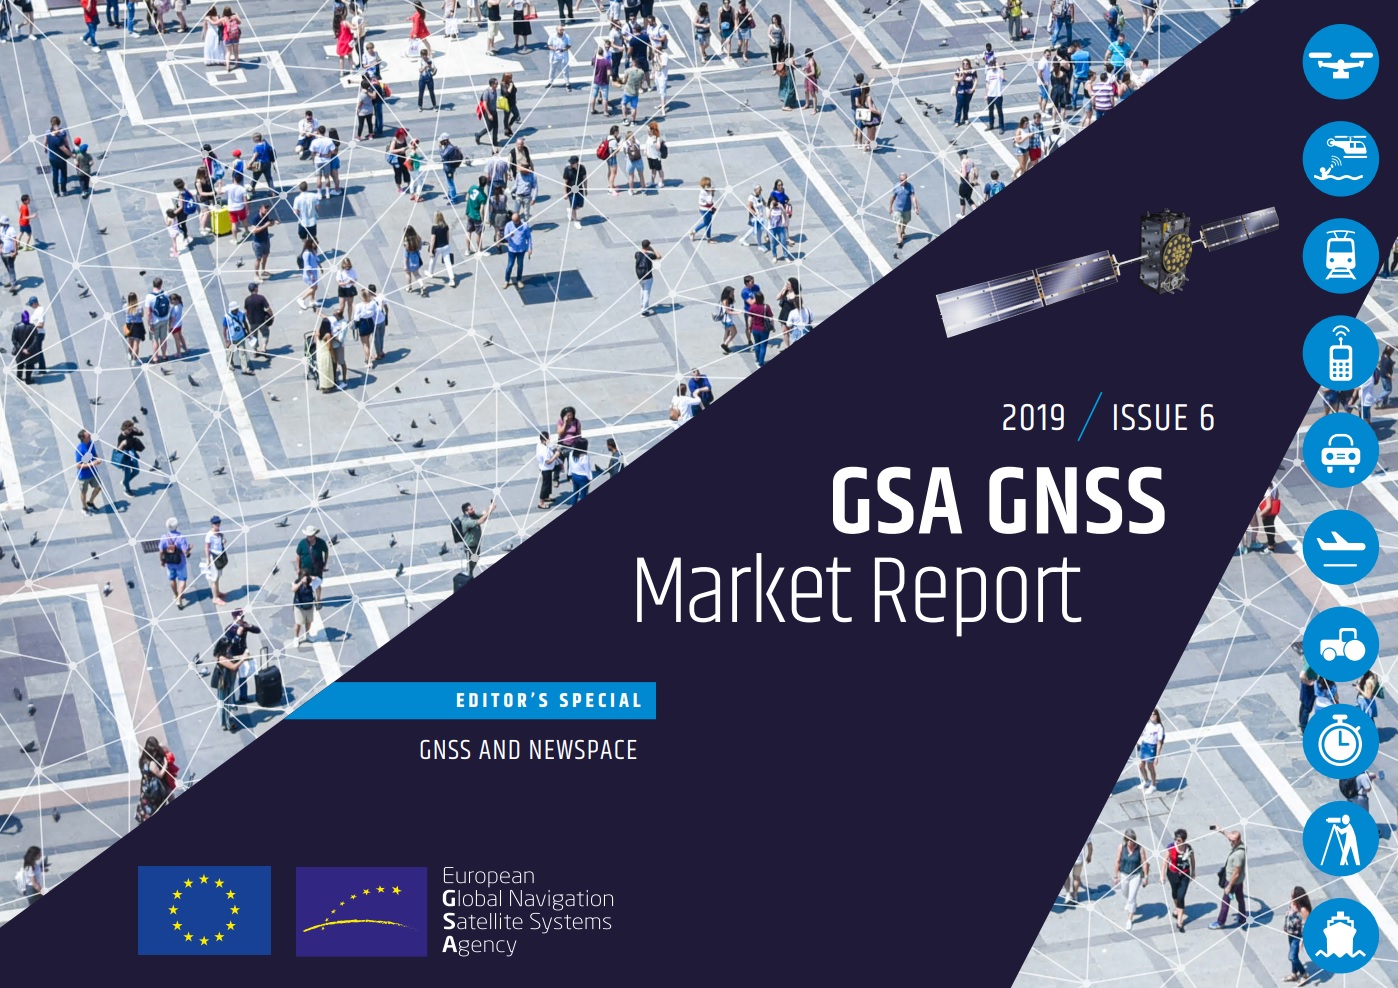 GNSS Market Report, issue 6 (2019)